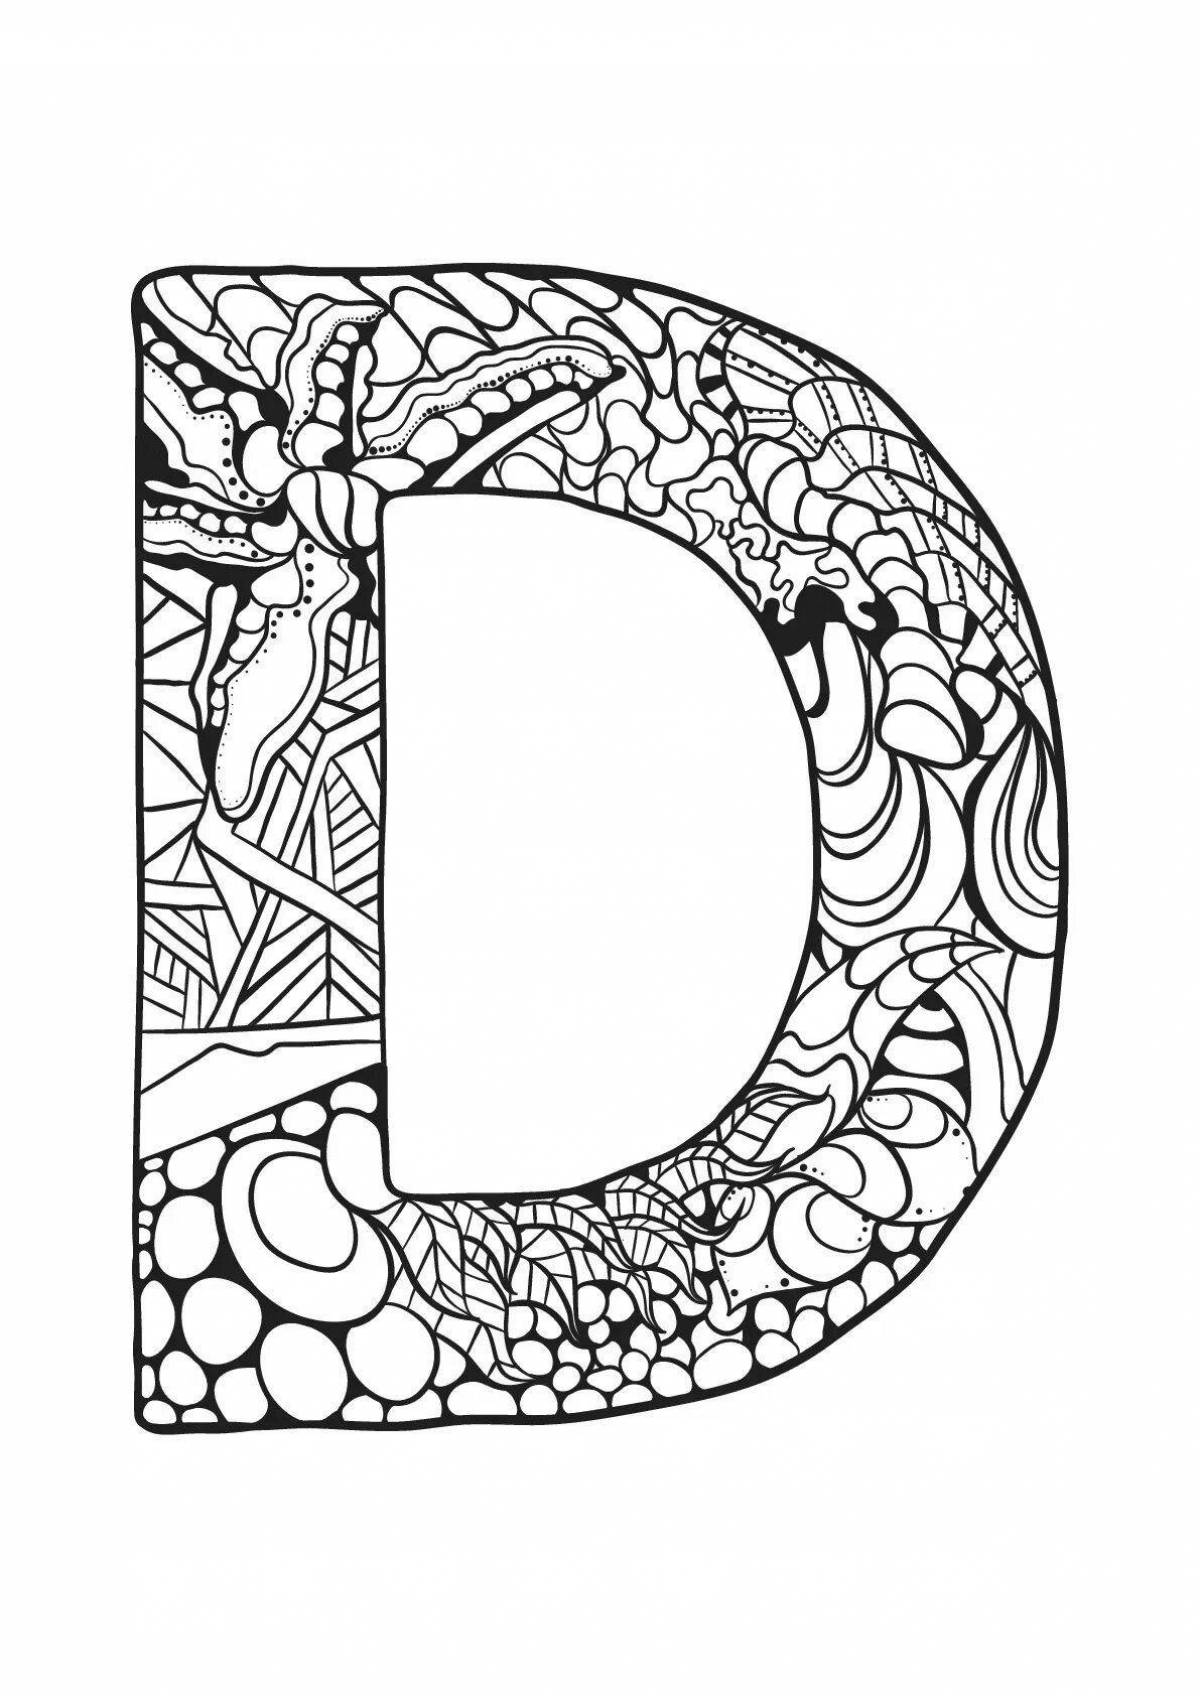 Coloring book relaxing anti-stress letters